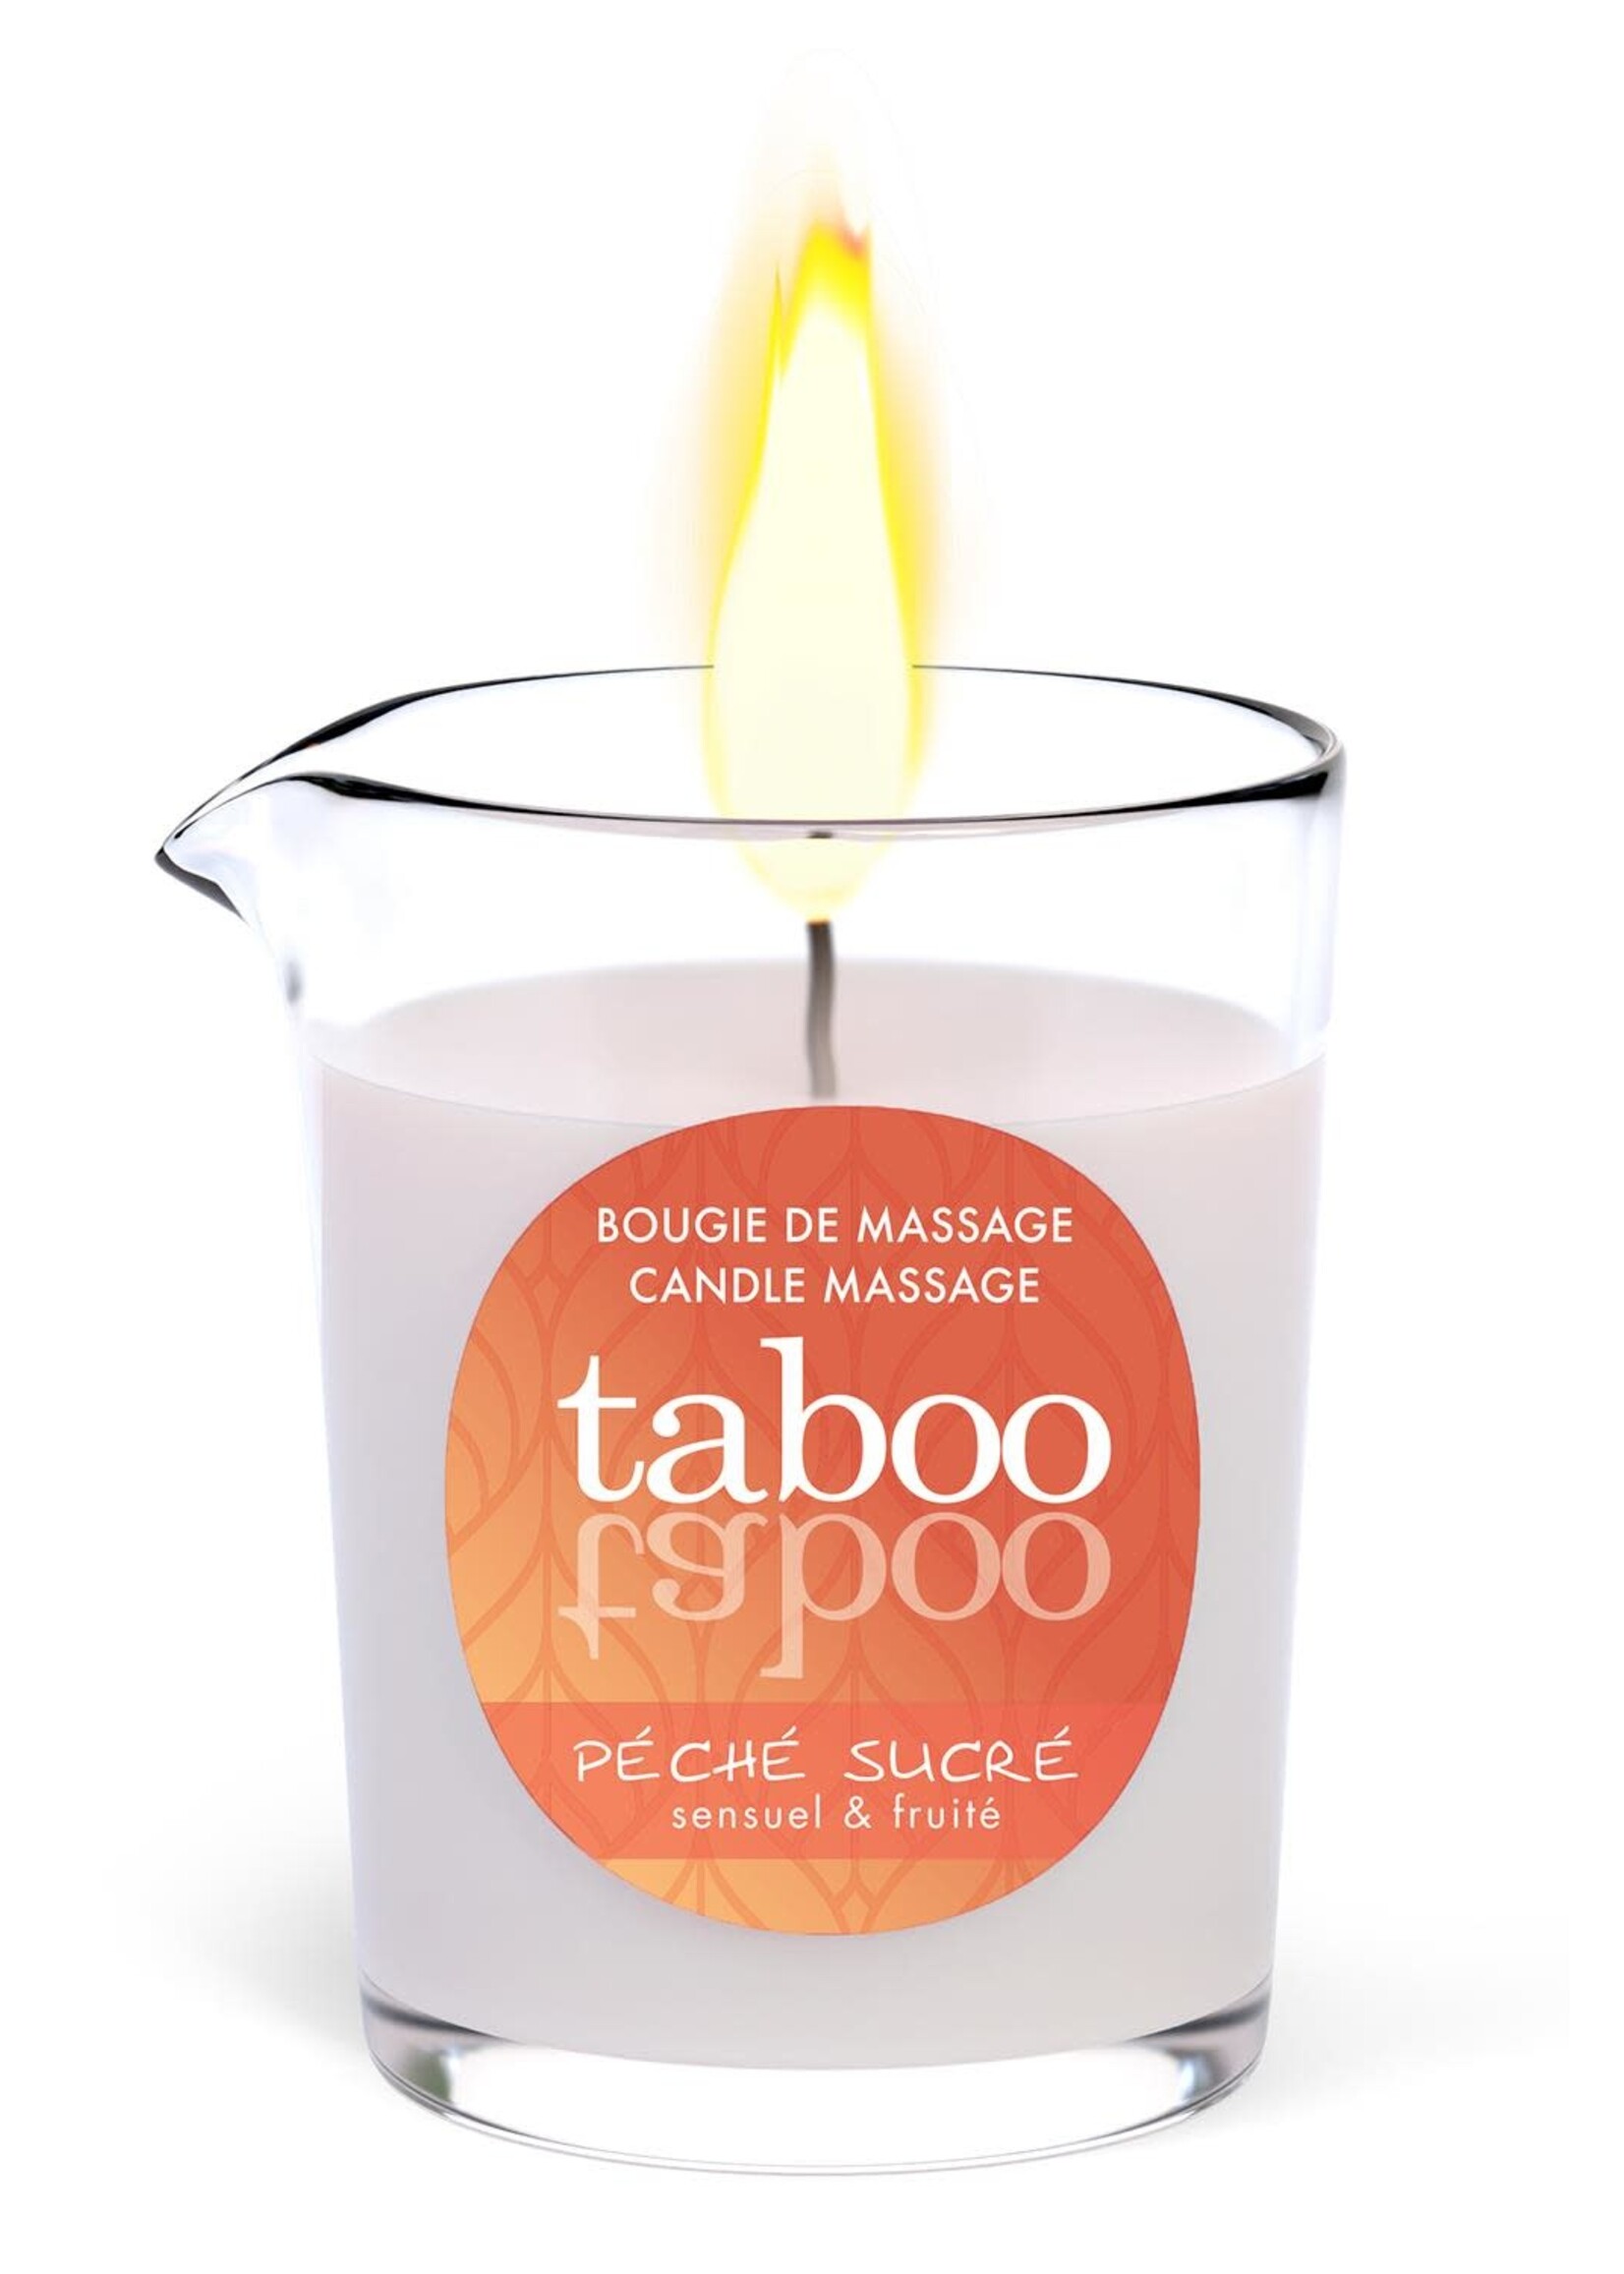 Taboo peche sucre candle for her 60 gram